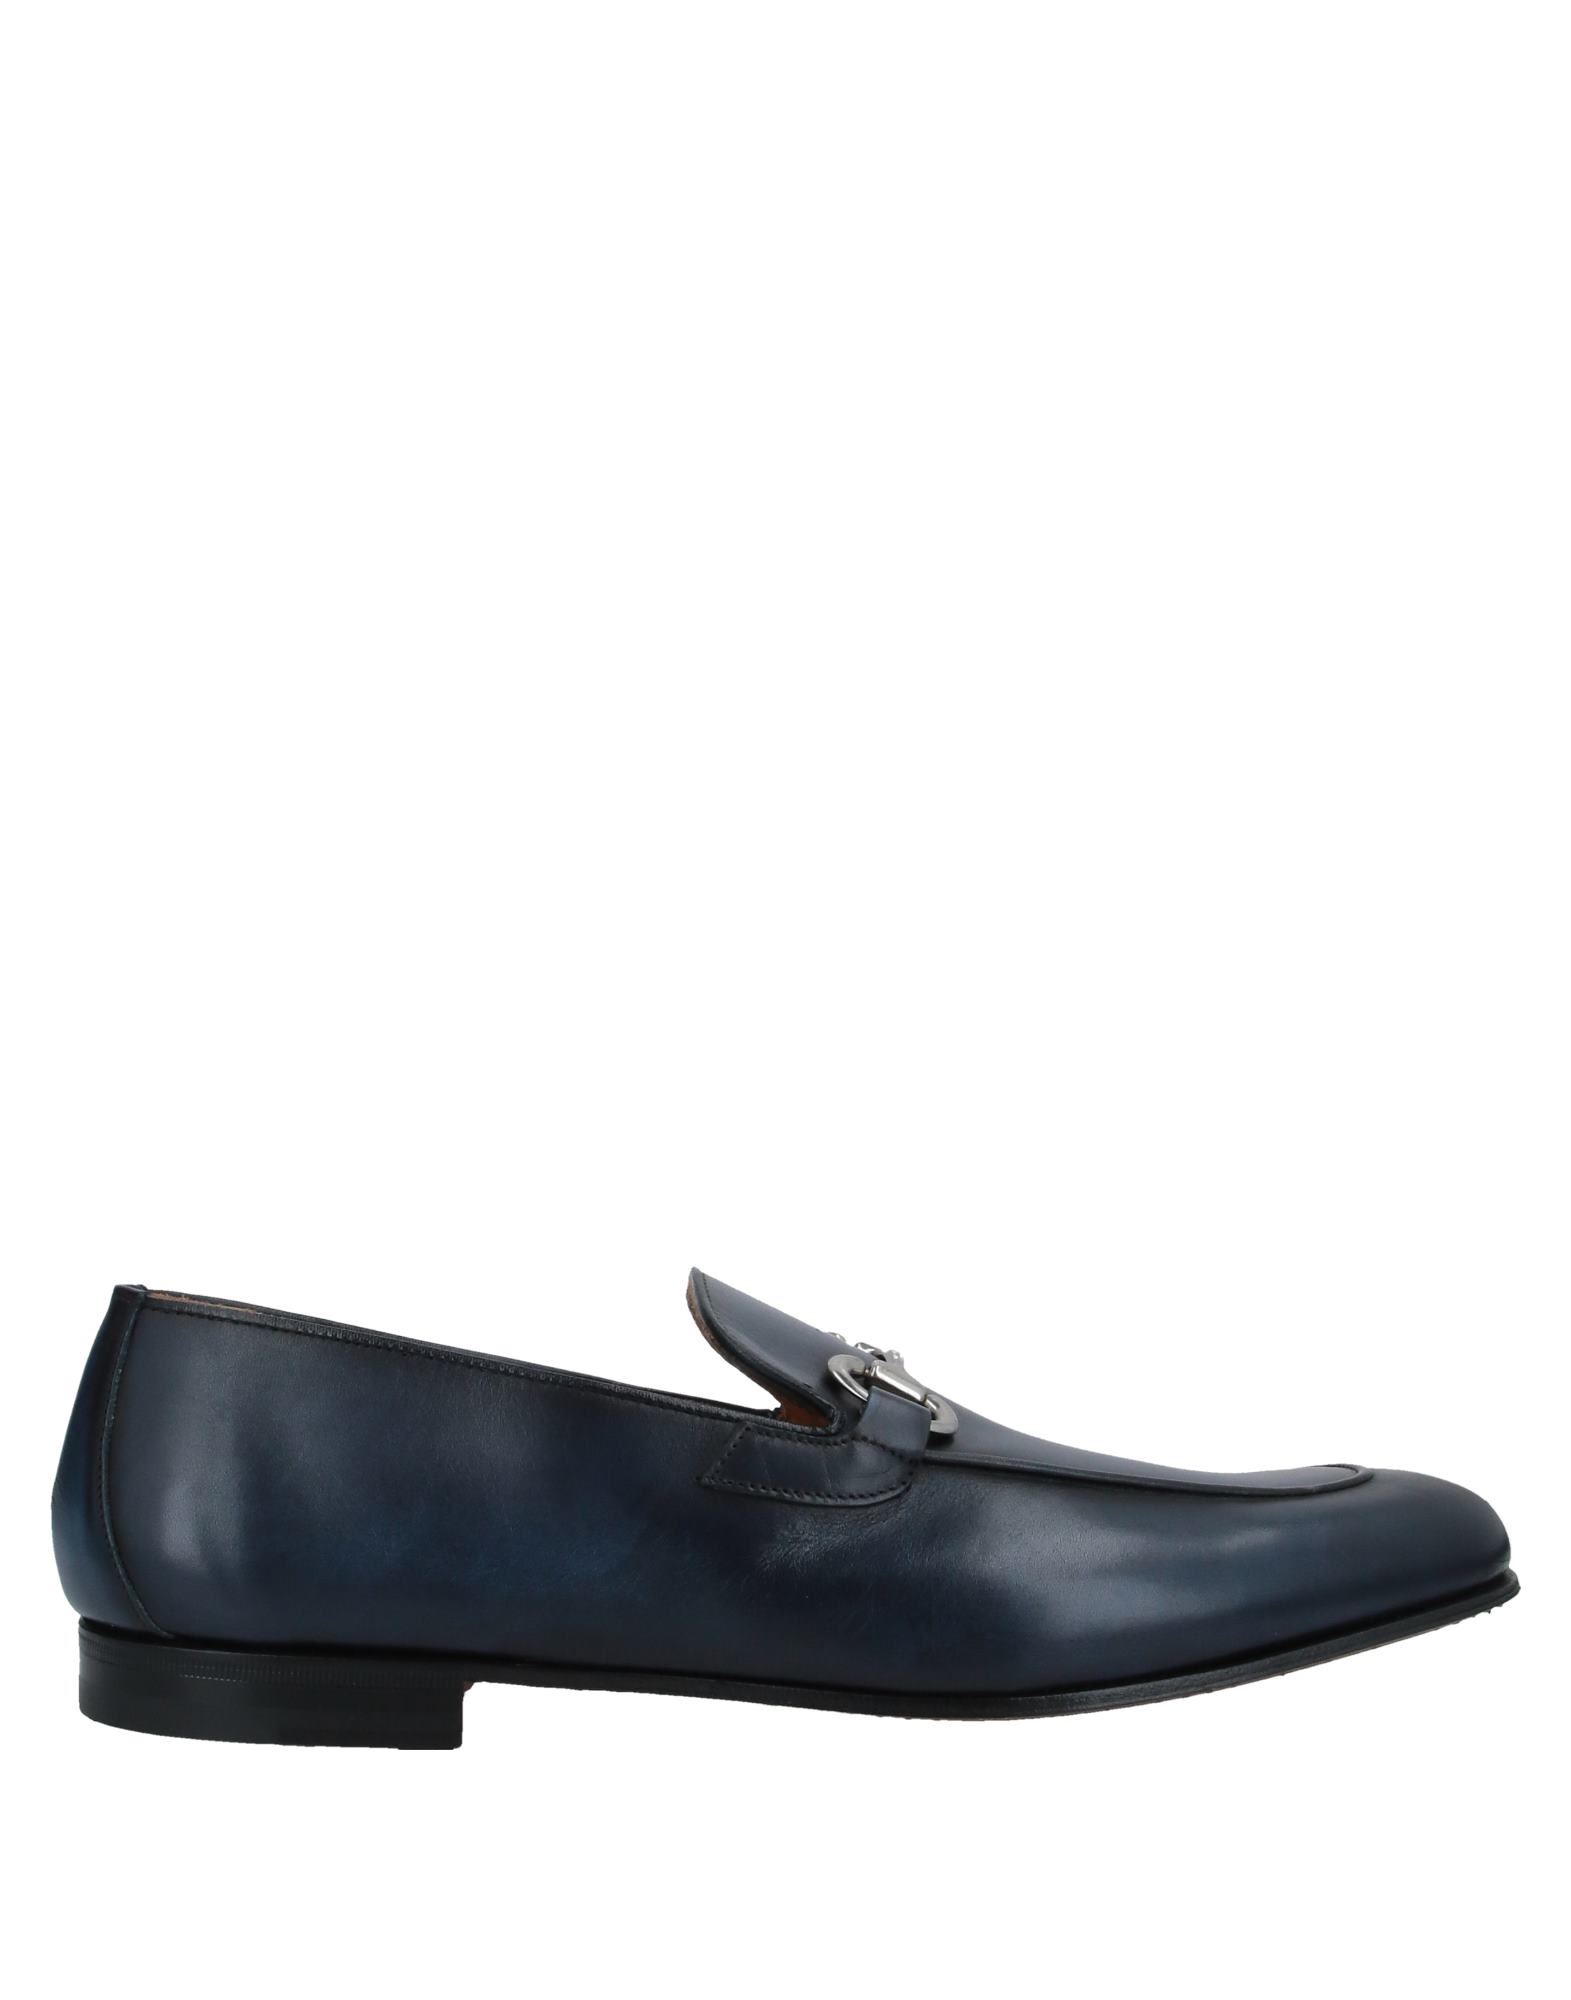 CALCE Loafers